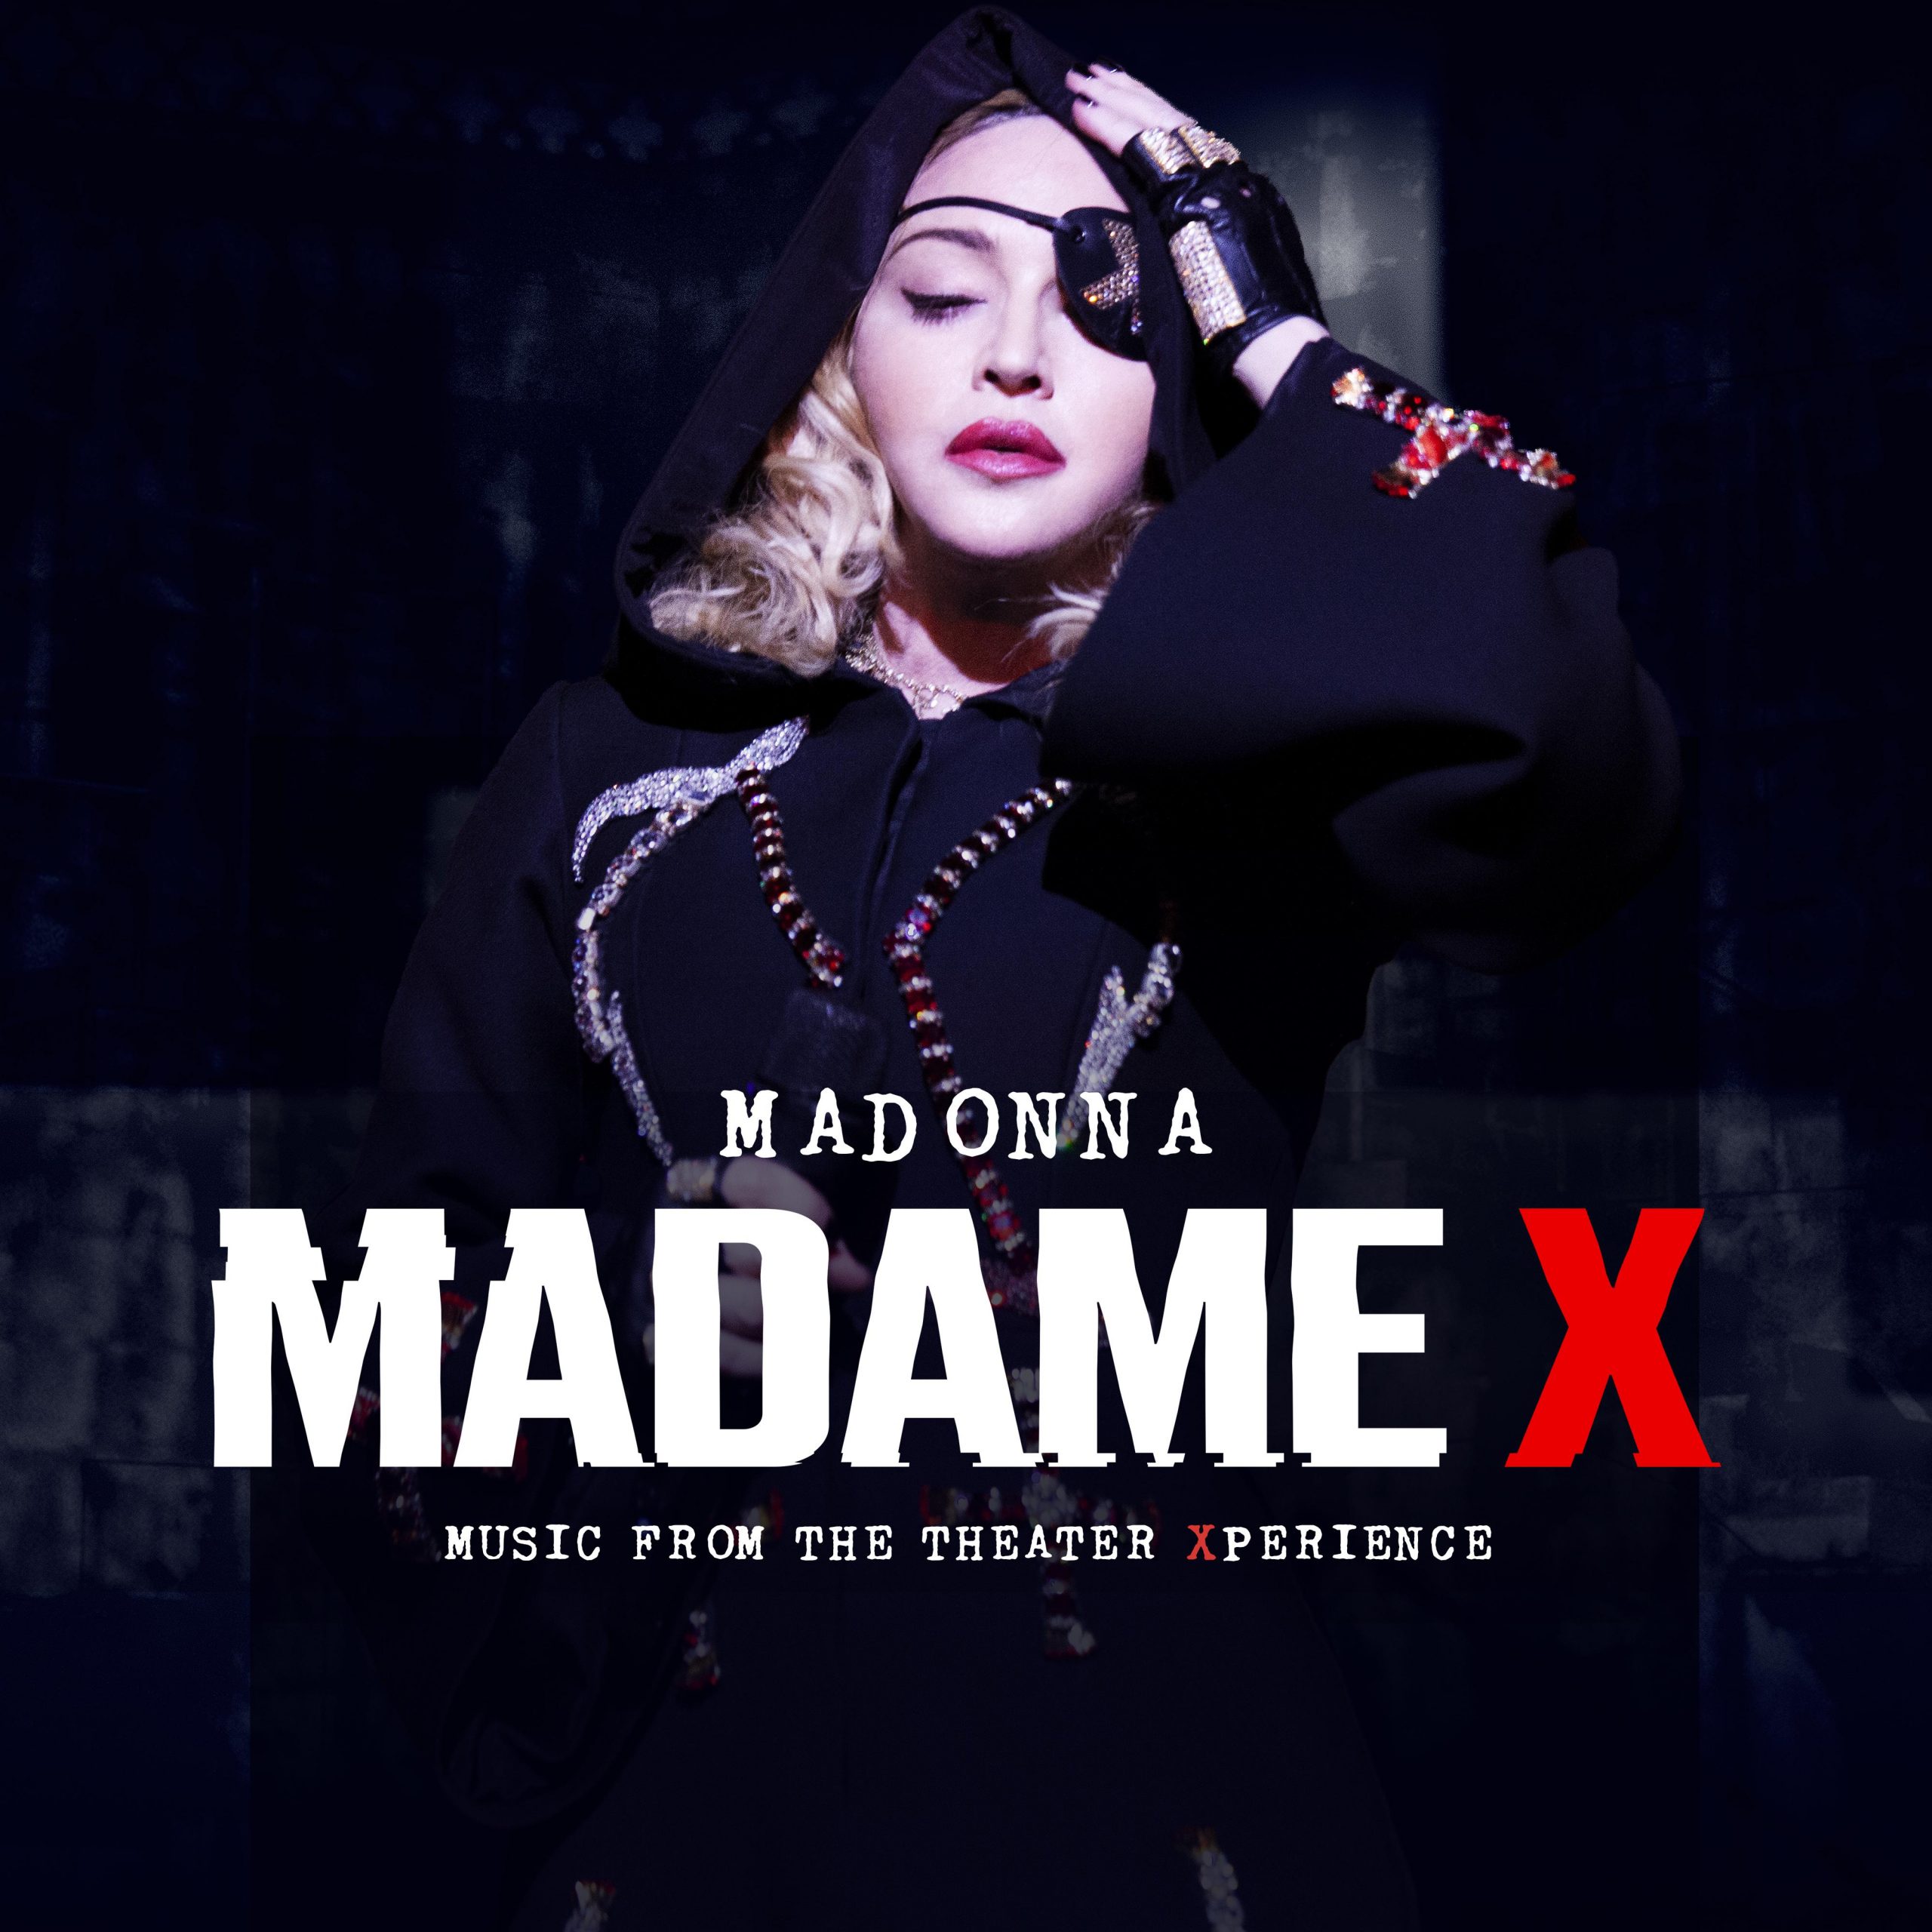 Madonna – Madame X: Music From The Theater Xperience (Live) (2021) [iTunes Plus AAC M4A] + Hi-Res-新房子